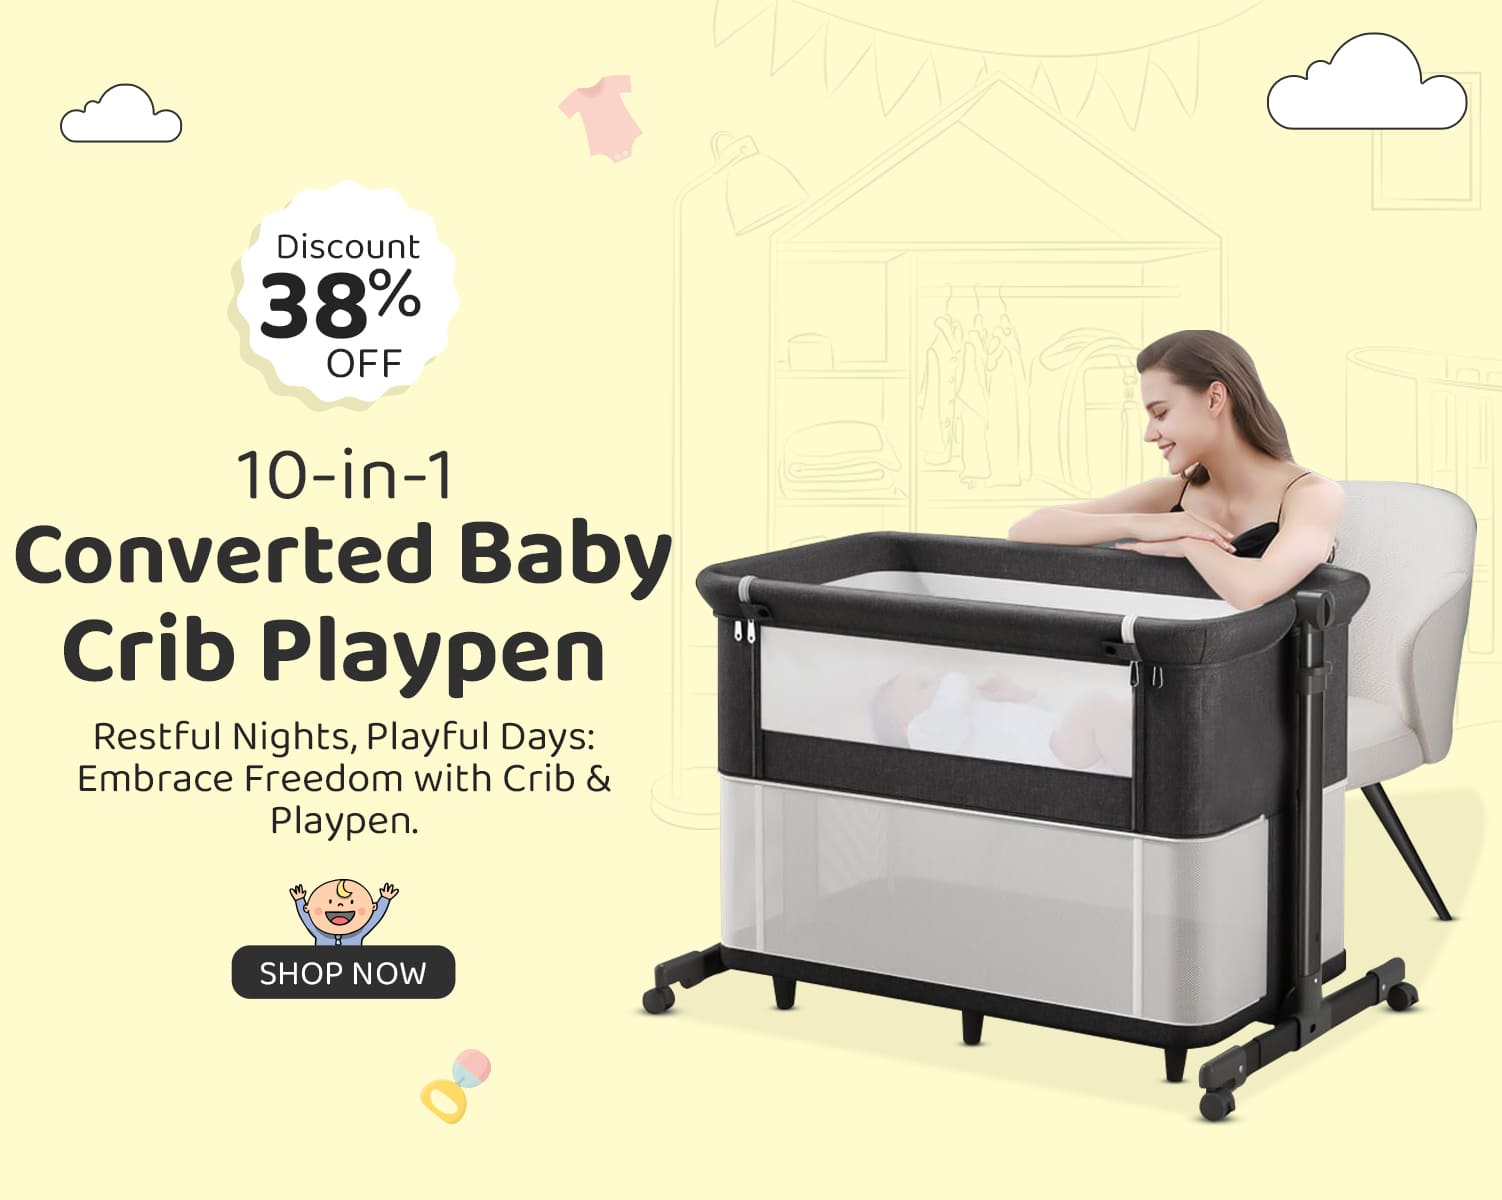 10-in-1 Converted Baby Crib Playpen